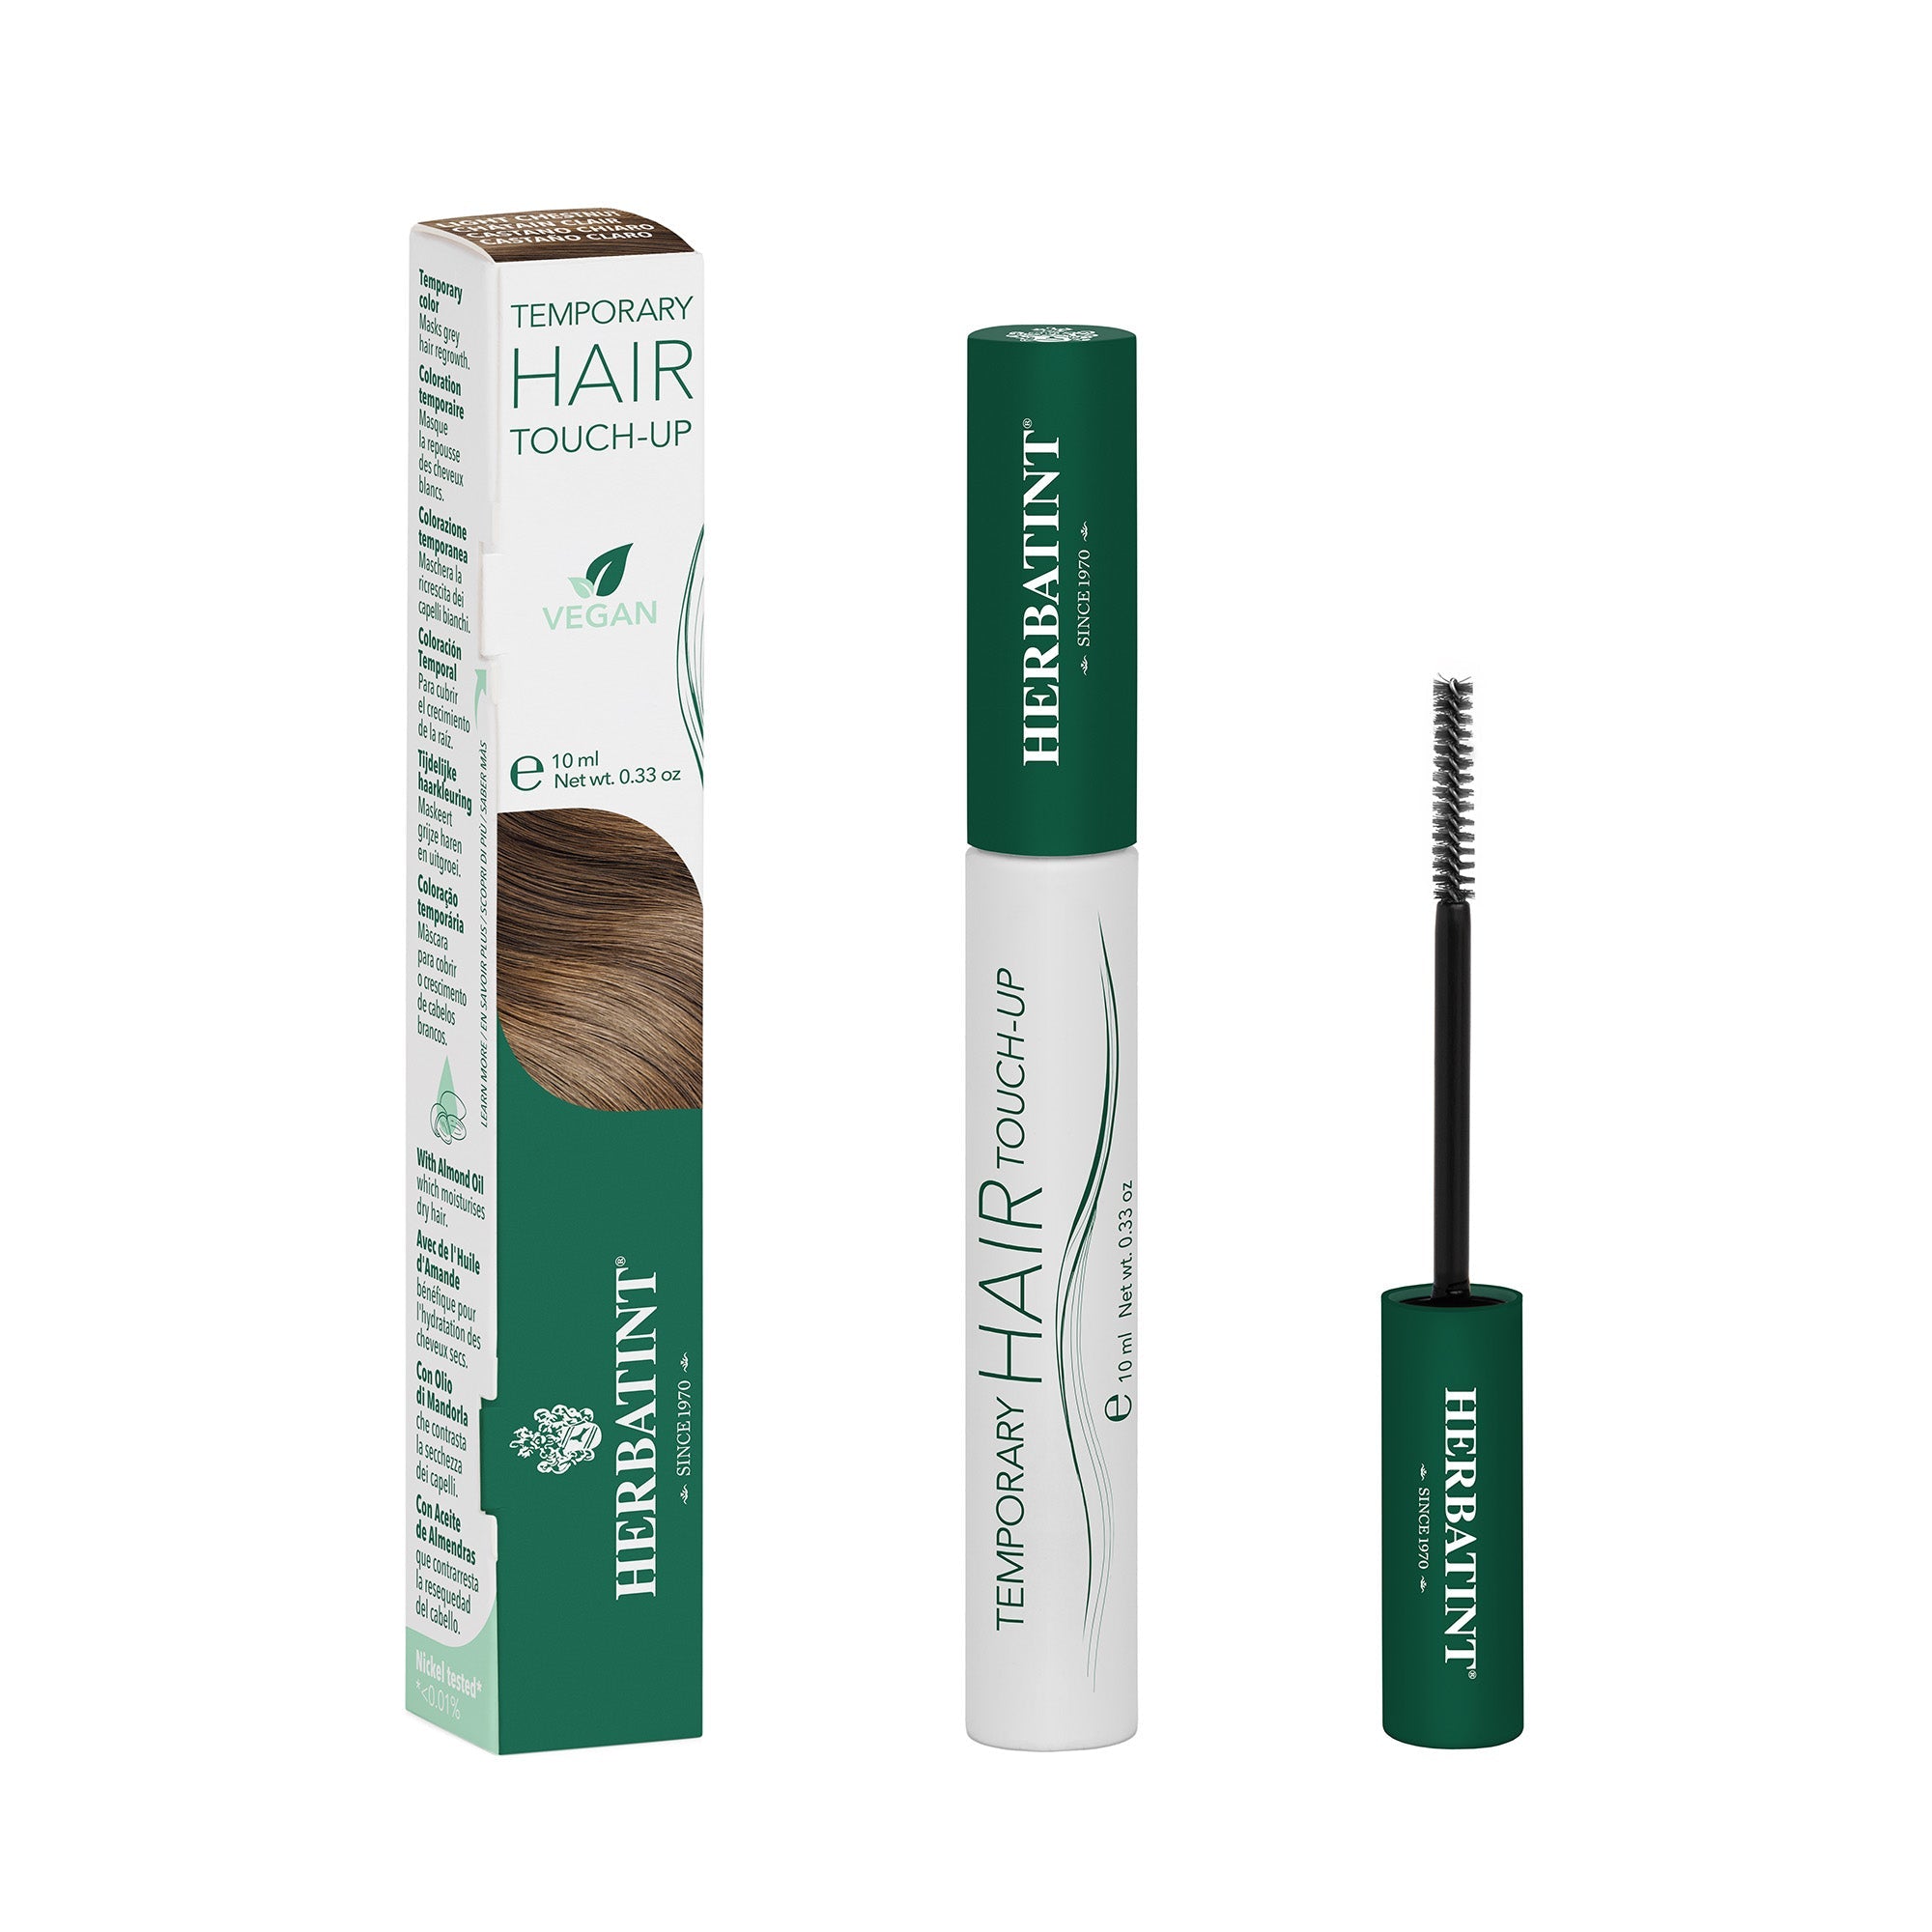 Herbatint Temporary Hair Touch-up Light Chestnut 60 mL - A.Vogel Canada